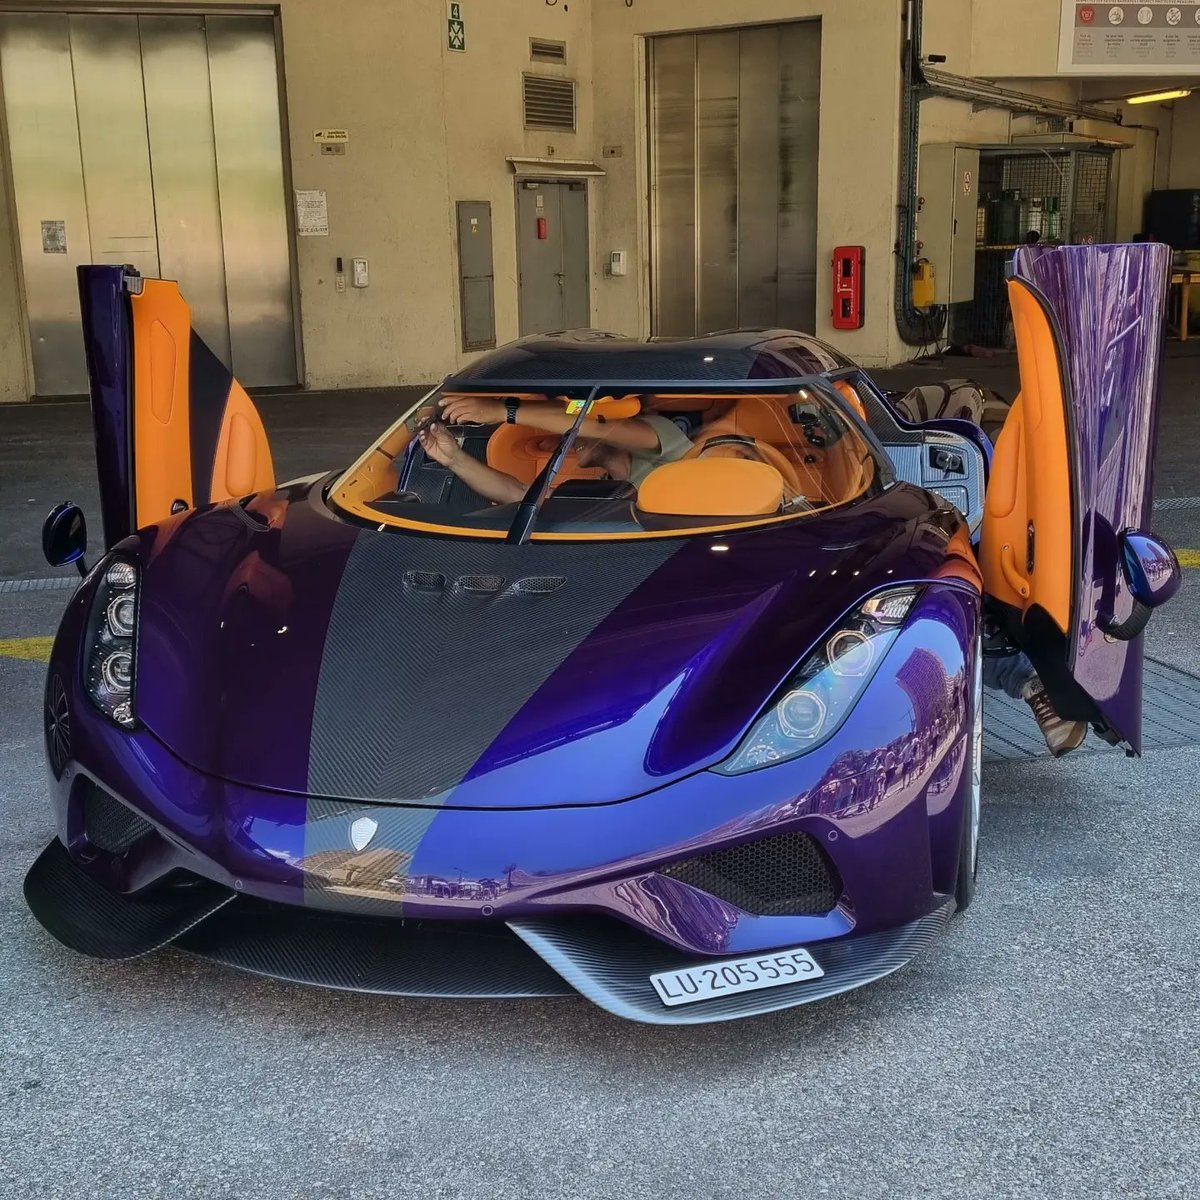 Koenigsegg Regera at this years Top Marques in Monaco 😲
#koenigsegg #regera #supercar #hypercar #exoticcar #monaco